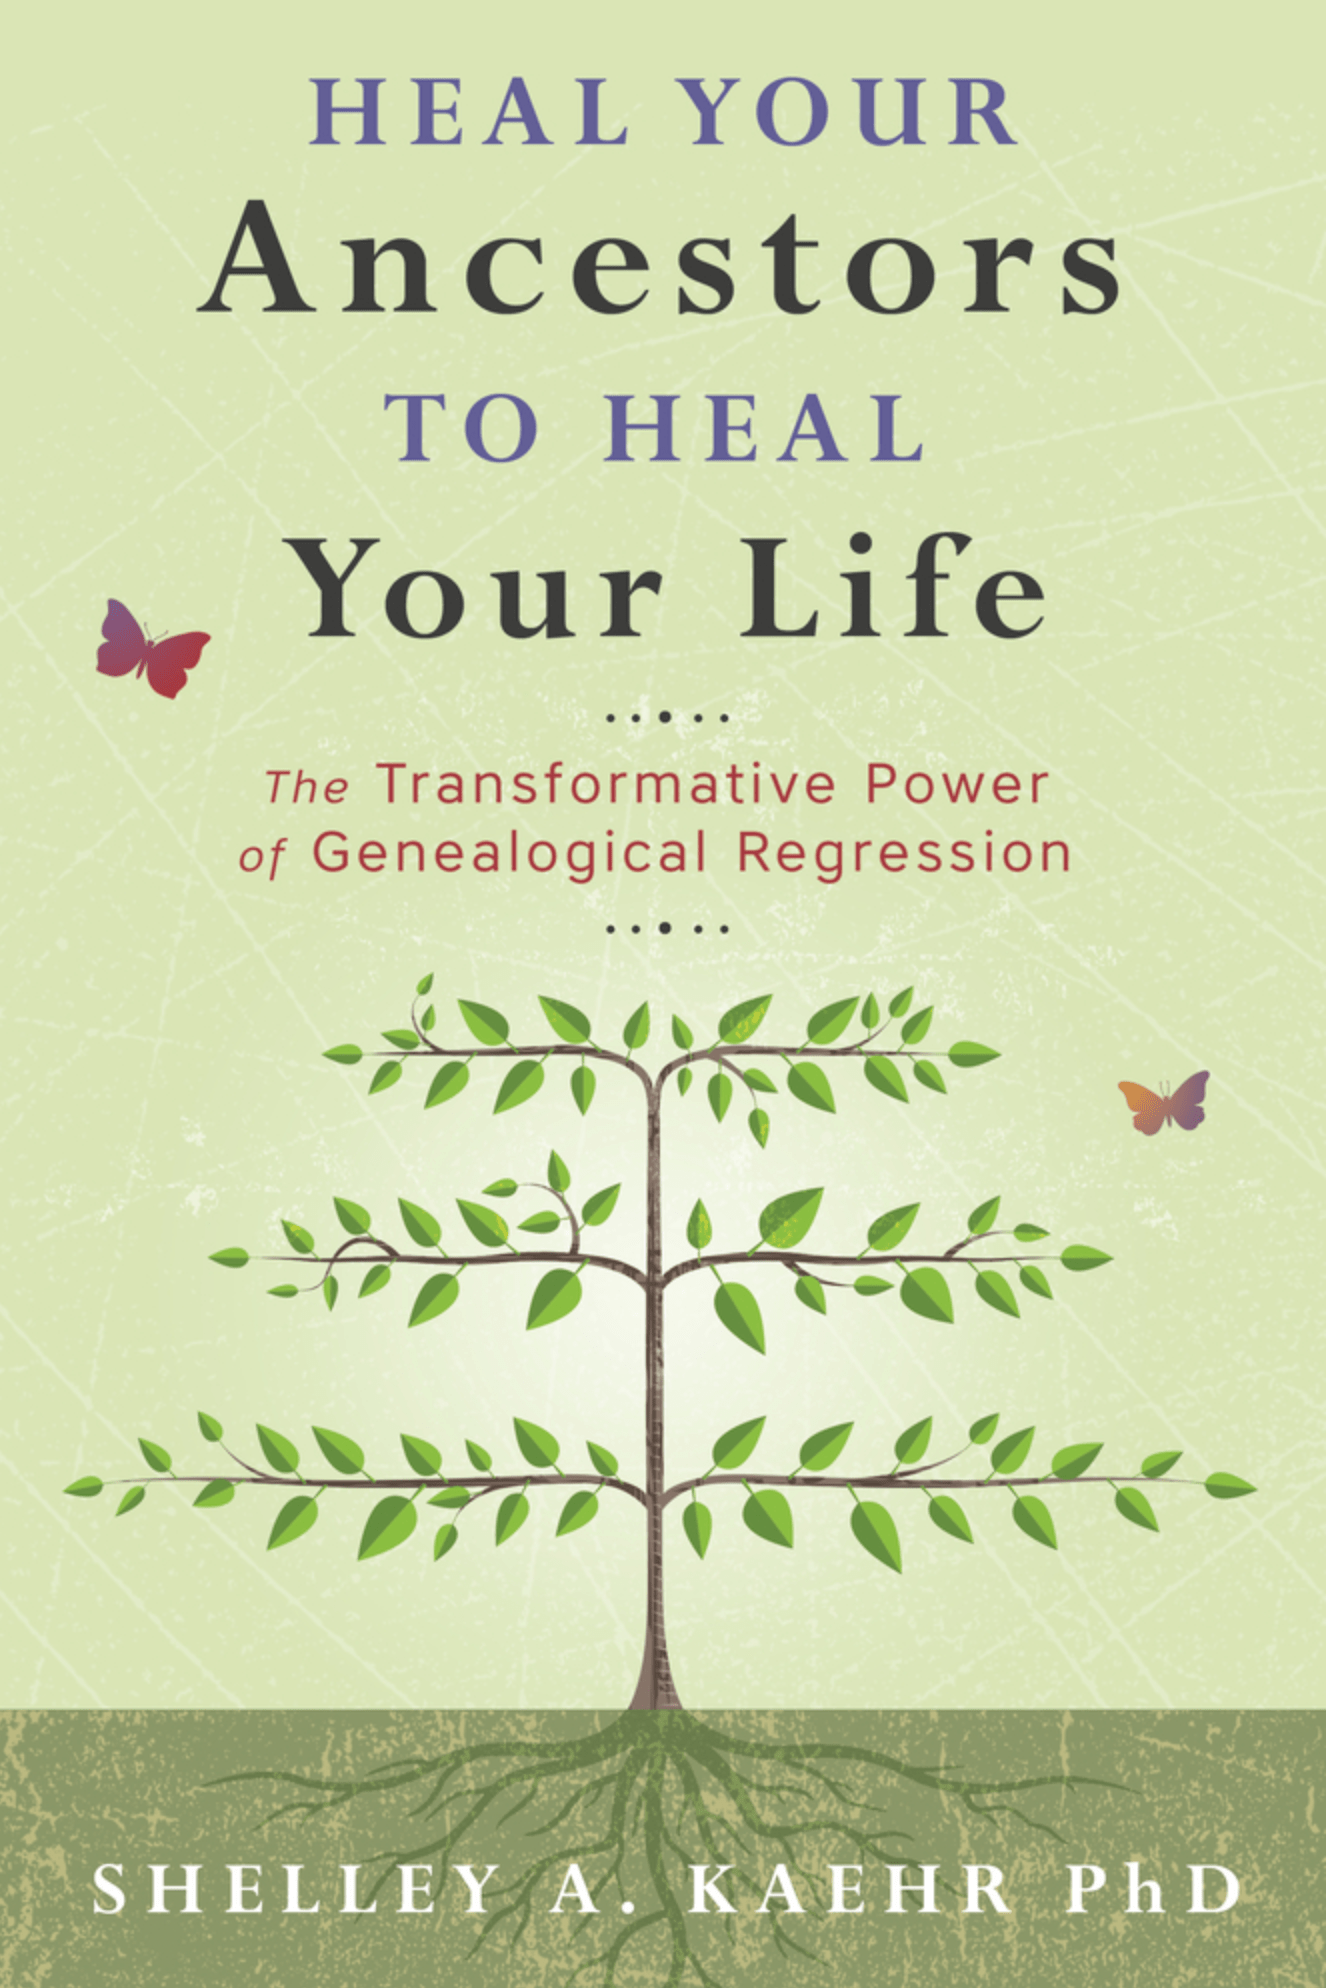 Heal Your Ancestors to Heal Your Life | The Transformative Power of Genealogical Regression - Spiral Circle